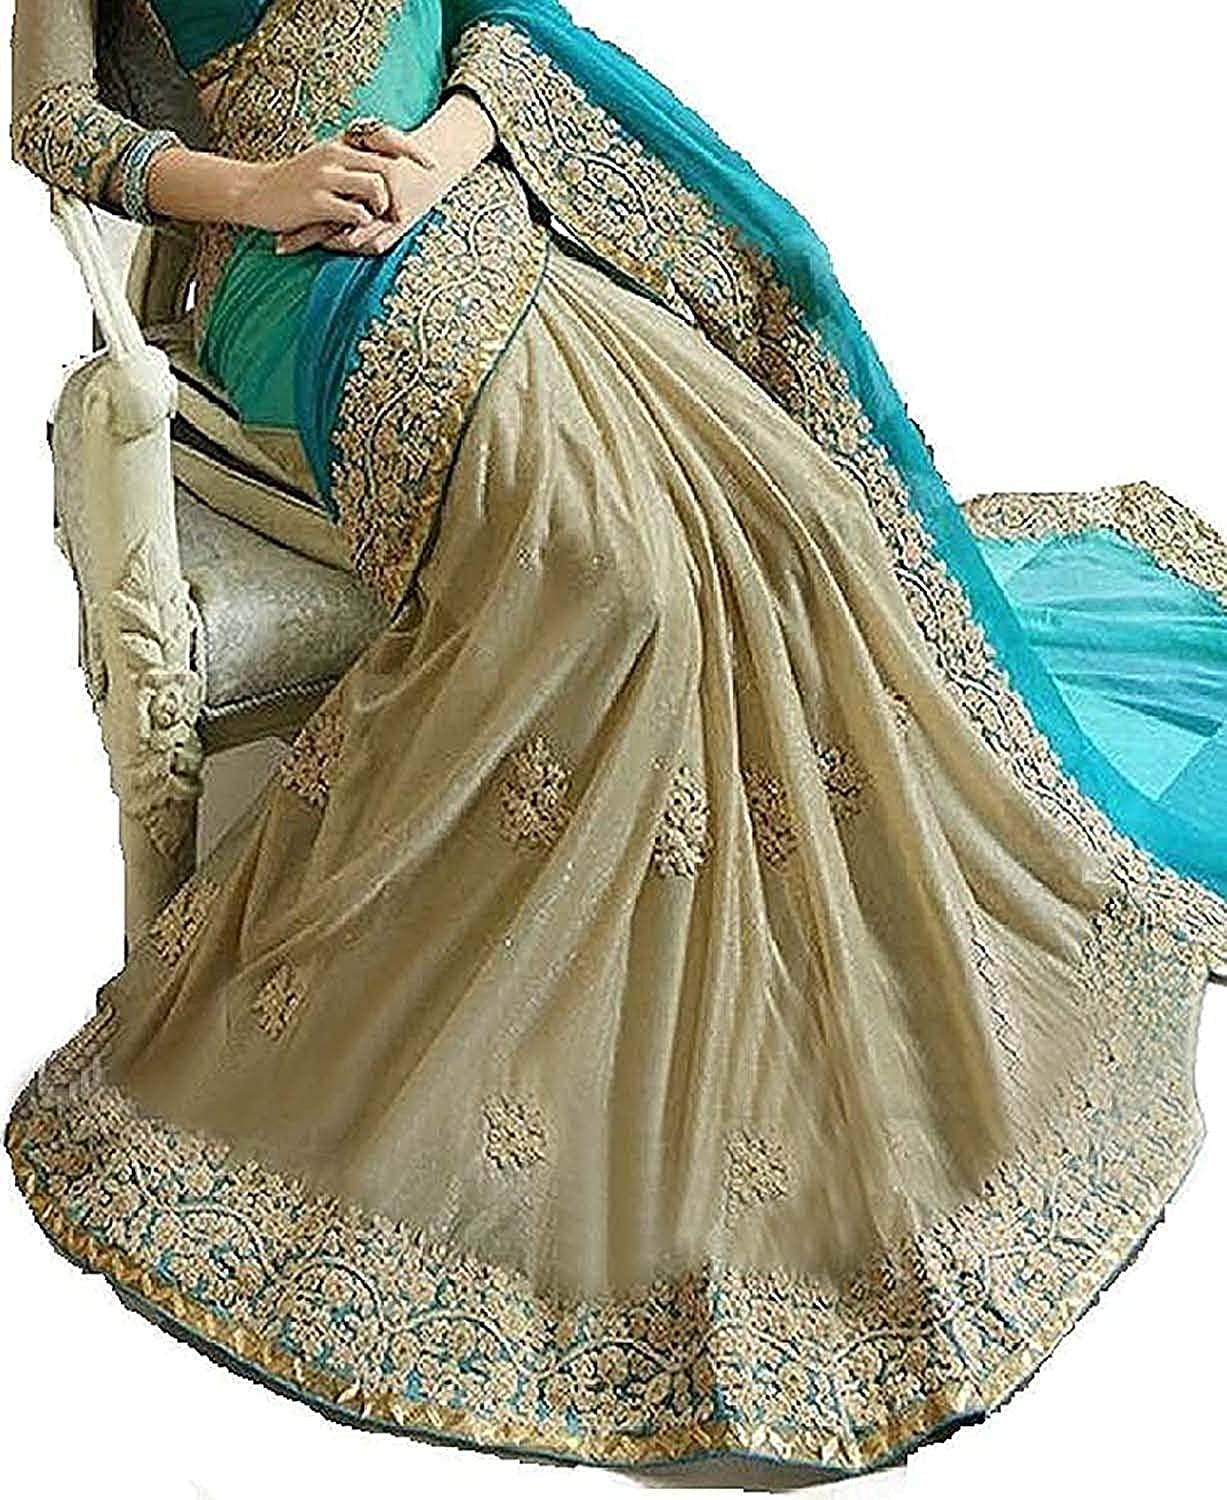 Women Bollywood Style Lycra Saree With Blouse Piece Indian Traditional Saree Wedding Dress Handmade Famous Actress Style Party Wear Free Size  Ethenic Wear Clothes For Women Embroidered - FajarShuruqSA